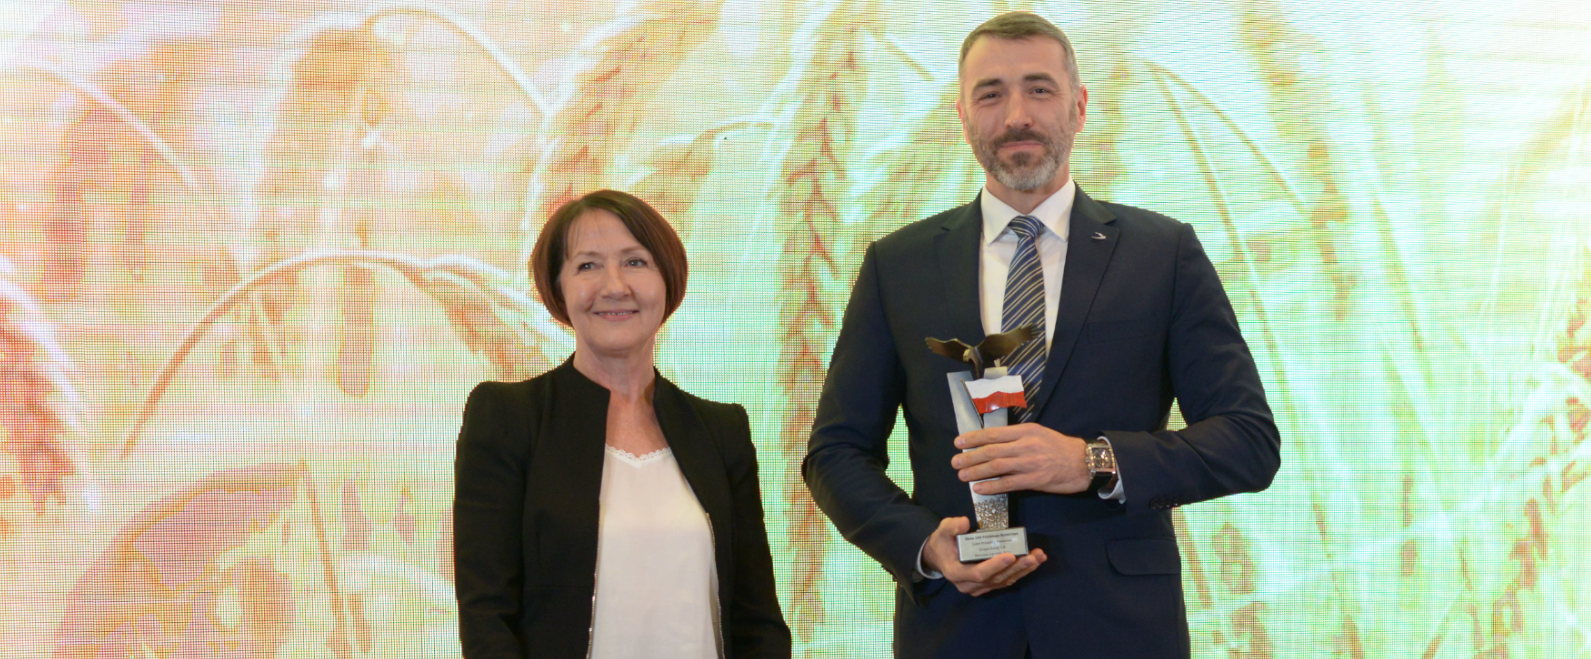 Grupa Azoty awarded in Golden 100 of Polish Agriculture ranking 